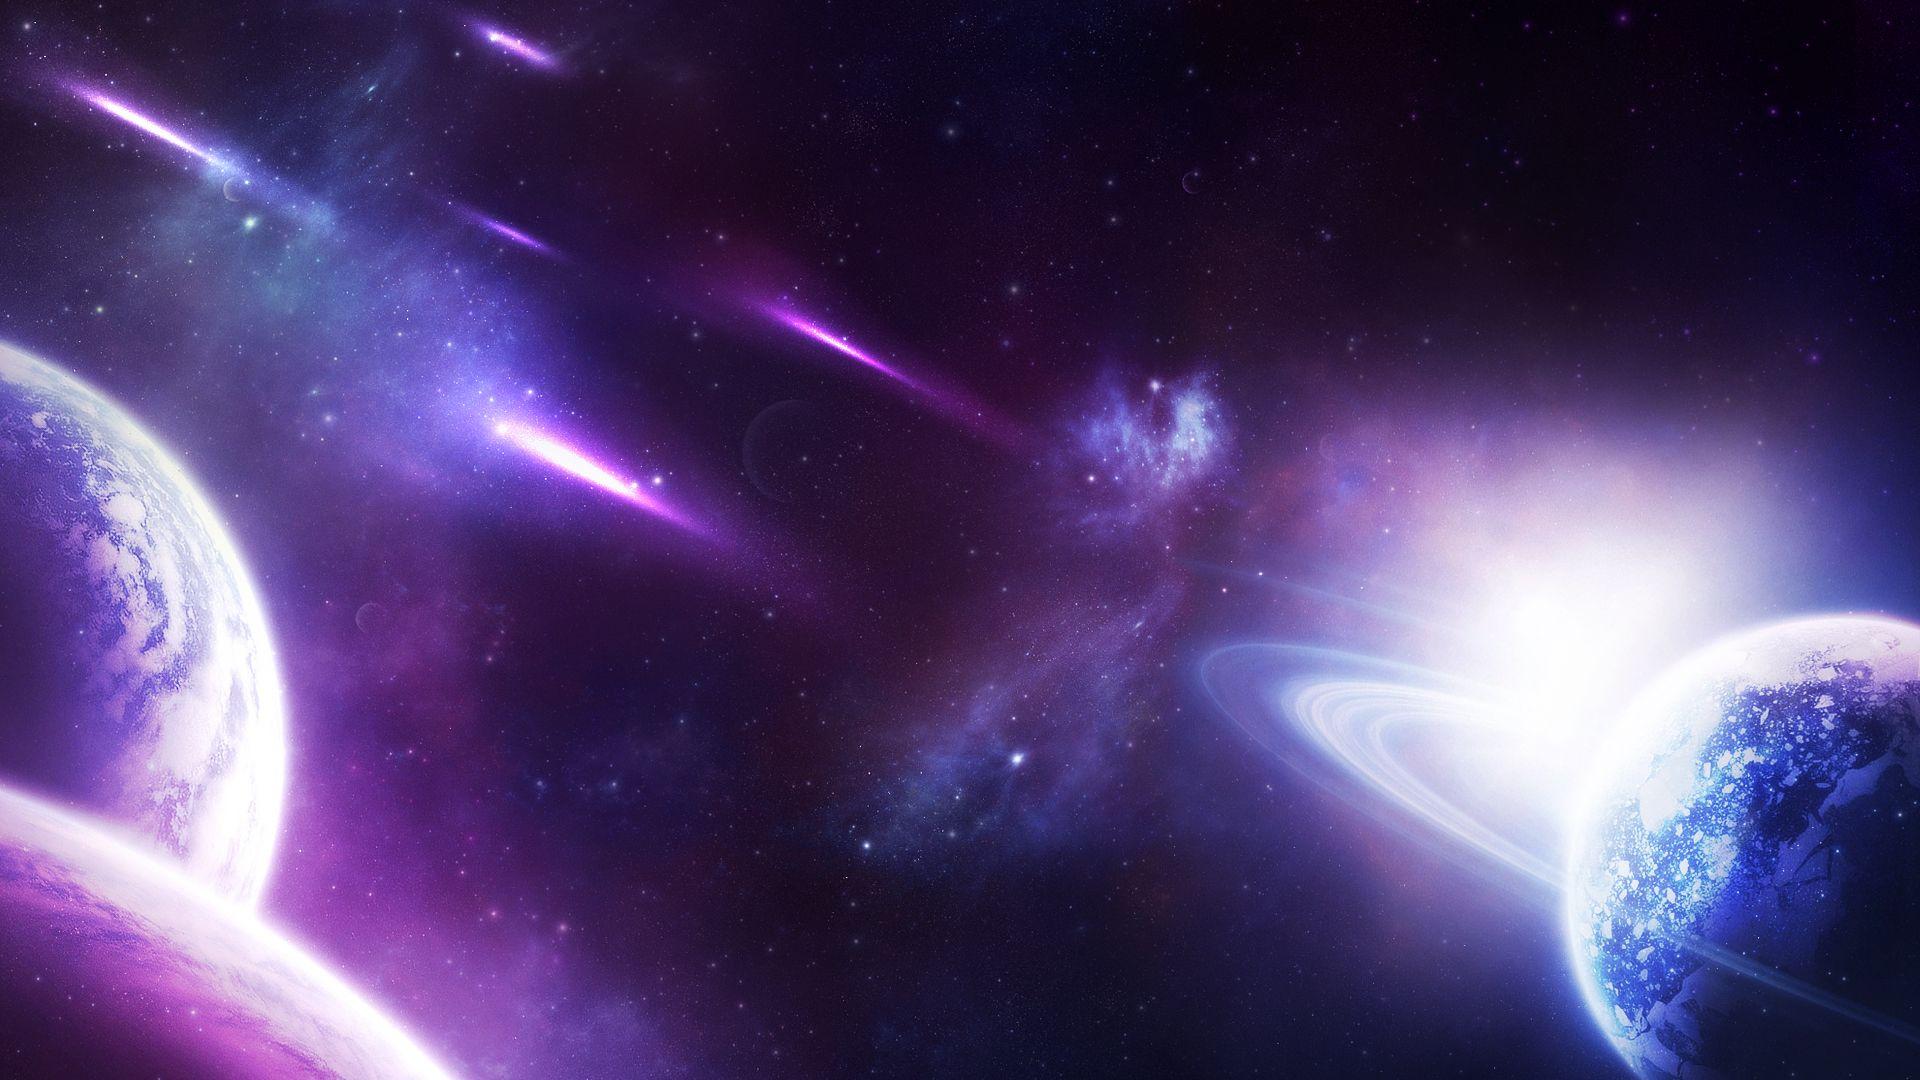 Neon Galaxy Wallpapers - Top Free Neon Galaxy Backgrounds ...